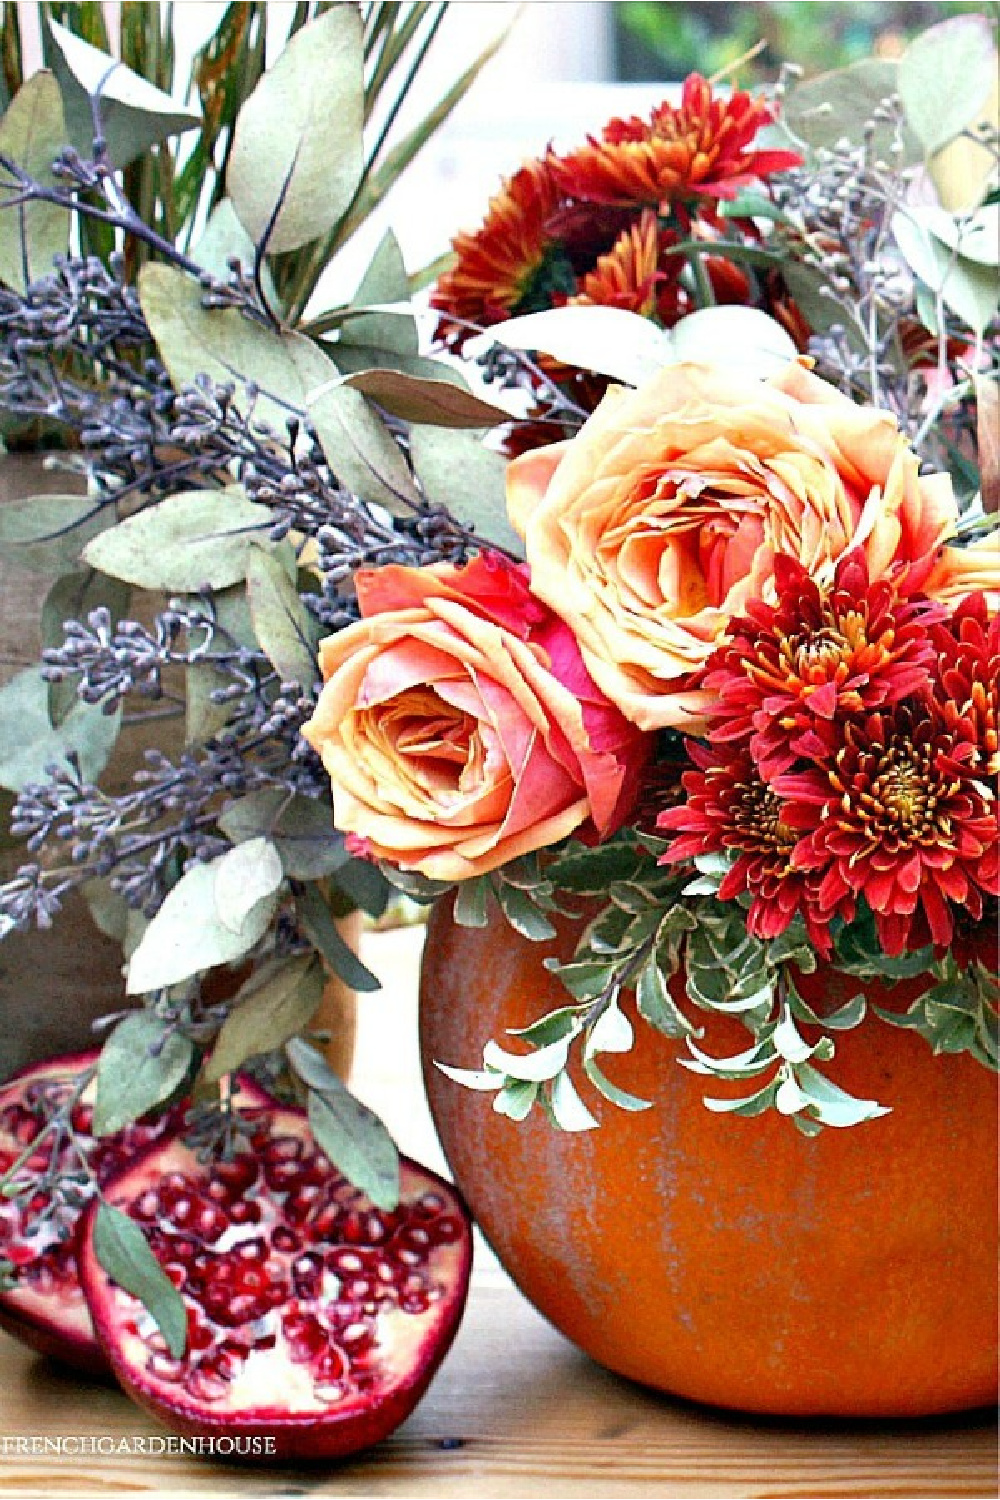 Breathtaking and vividly colorful fall blooms in a pumpkin vase for autumn splendor by FrenchGardenHouse. #pumpkin #centerpiece #fallfloral #autumntable